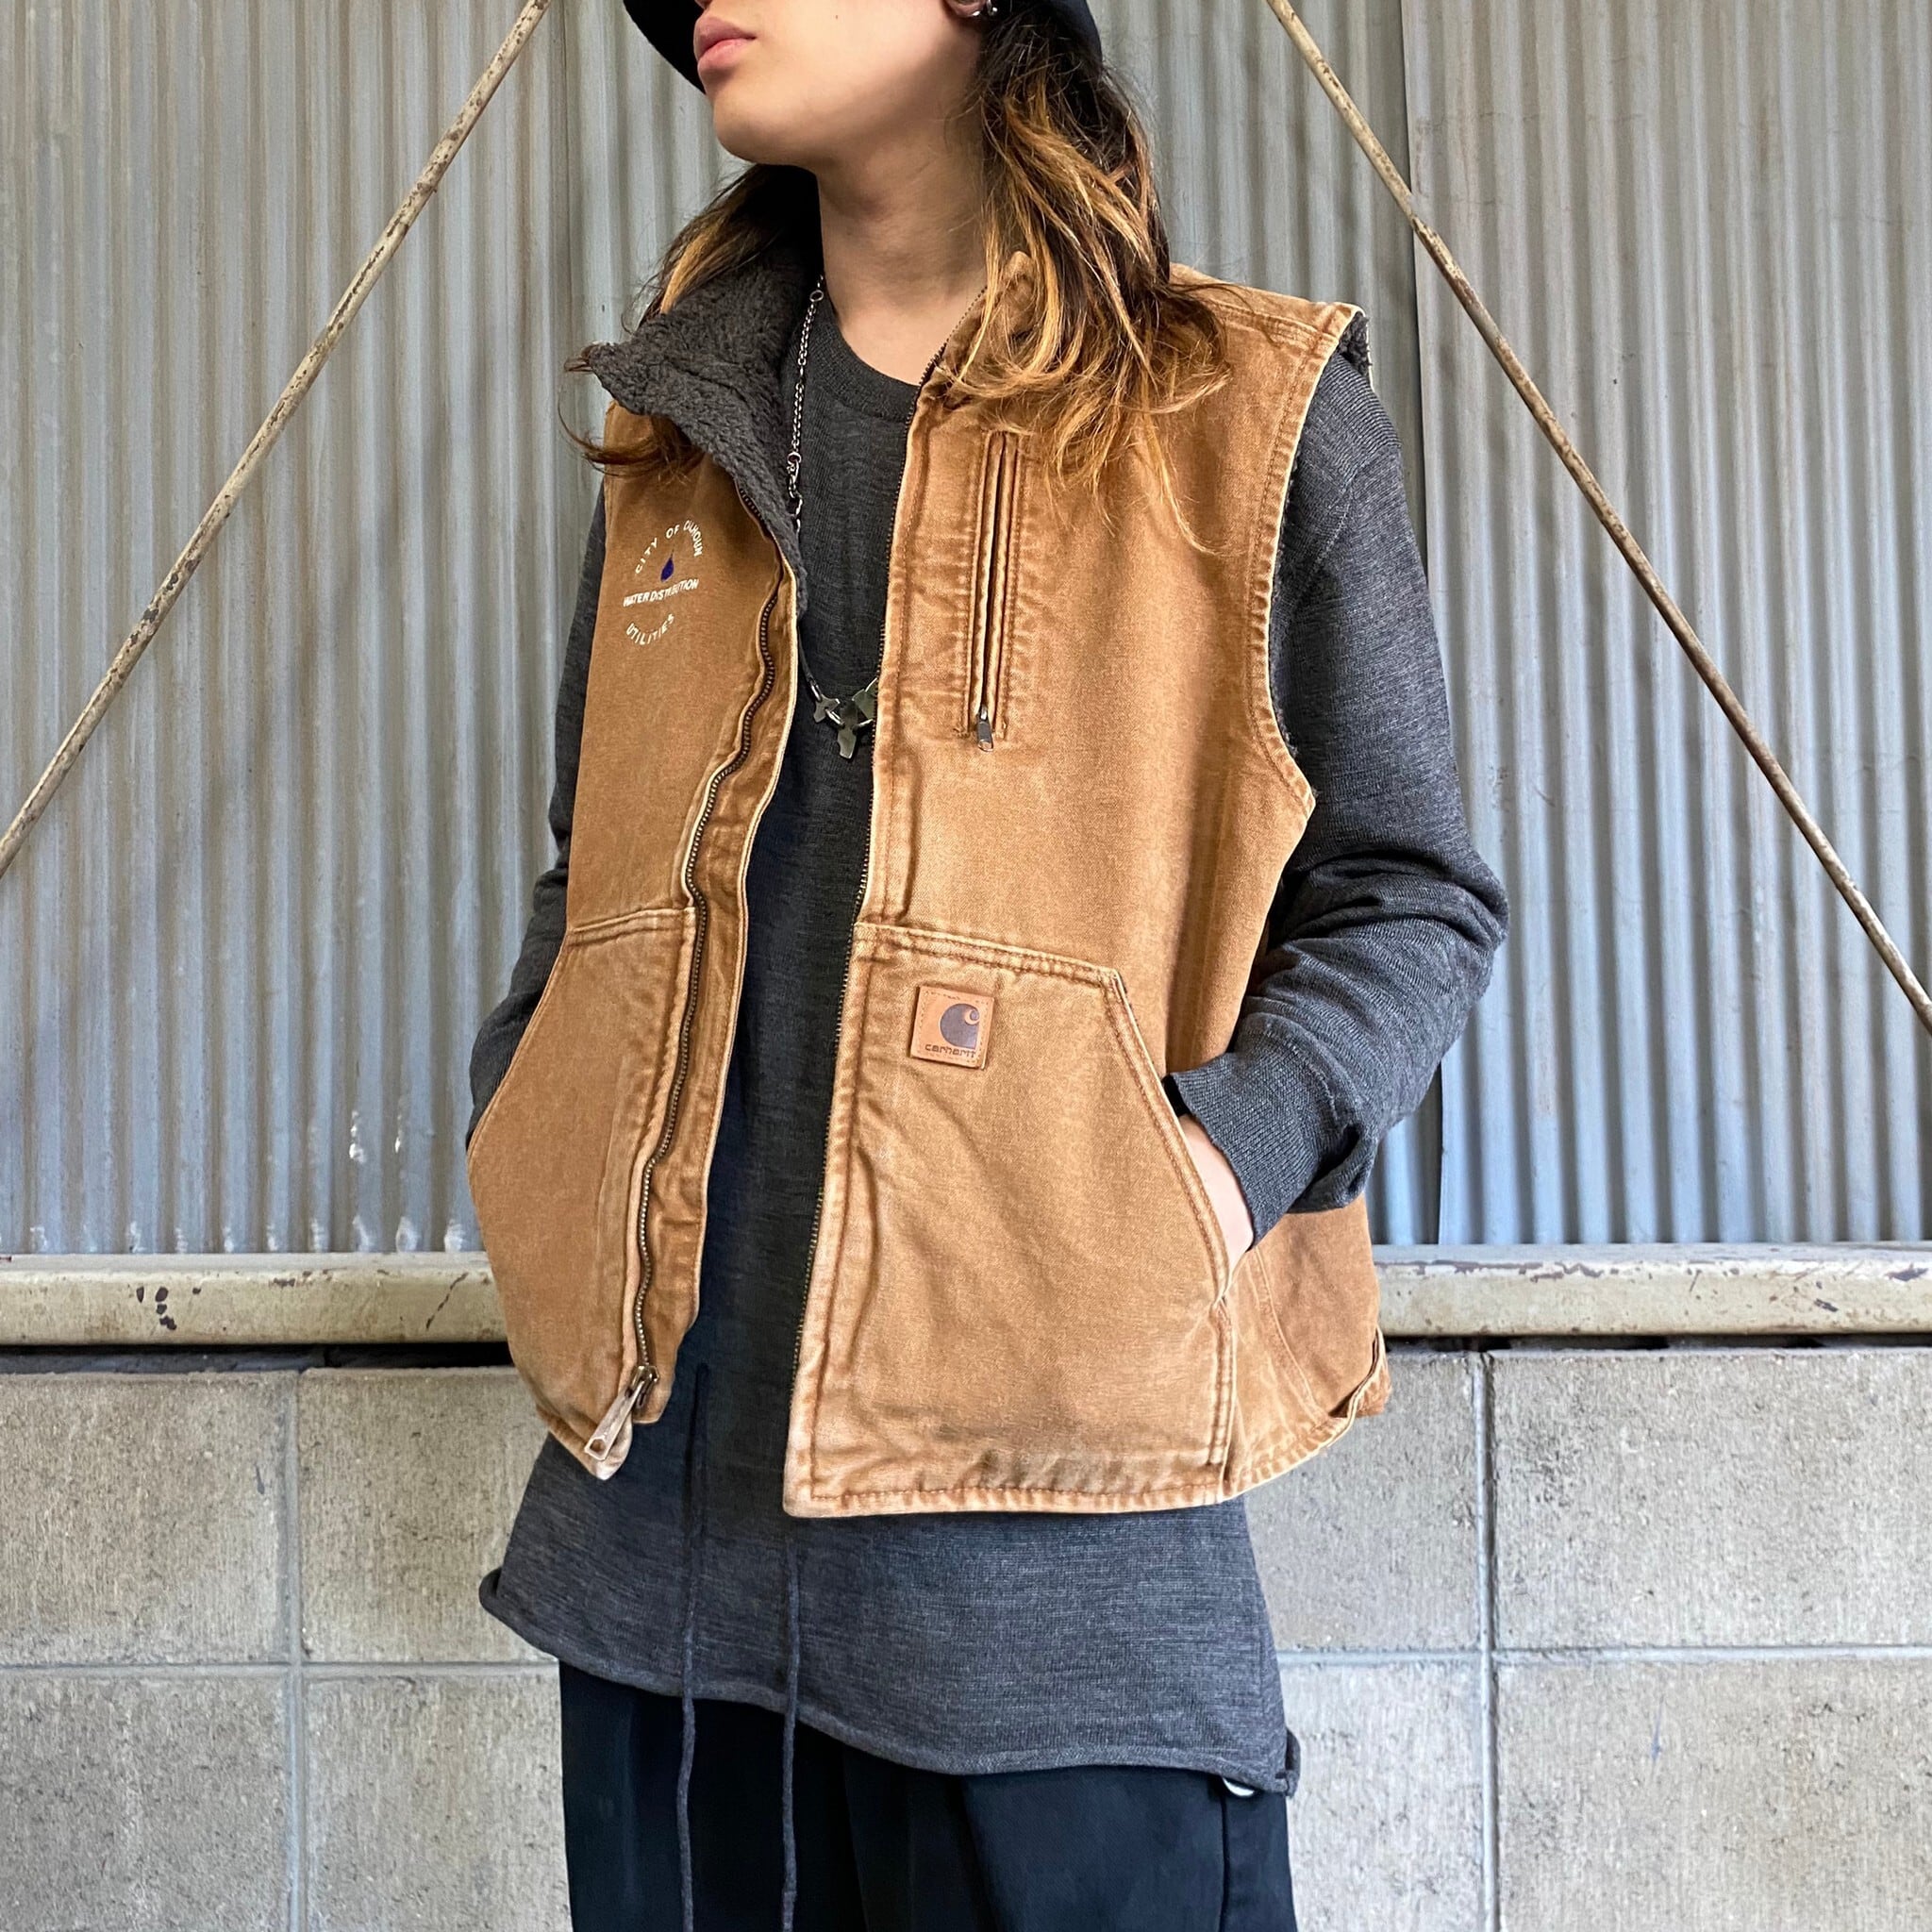 Carhartt カーハート ダック地 ボアワークベスト メンズL 古着 キャメル ブラウン 茶色 企業ロゴ 刺繍【ワークジャケット】 | cave  古着屋【公式】古着通販サイト powered by BASE